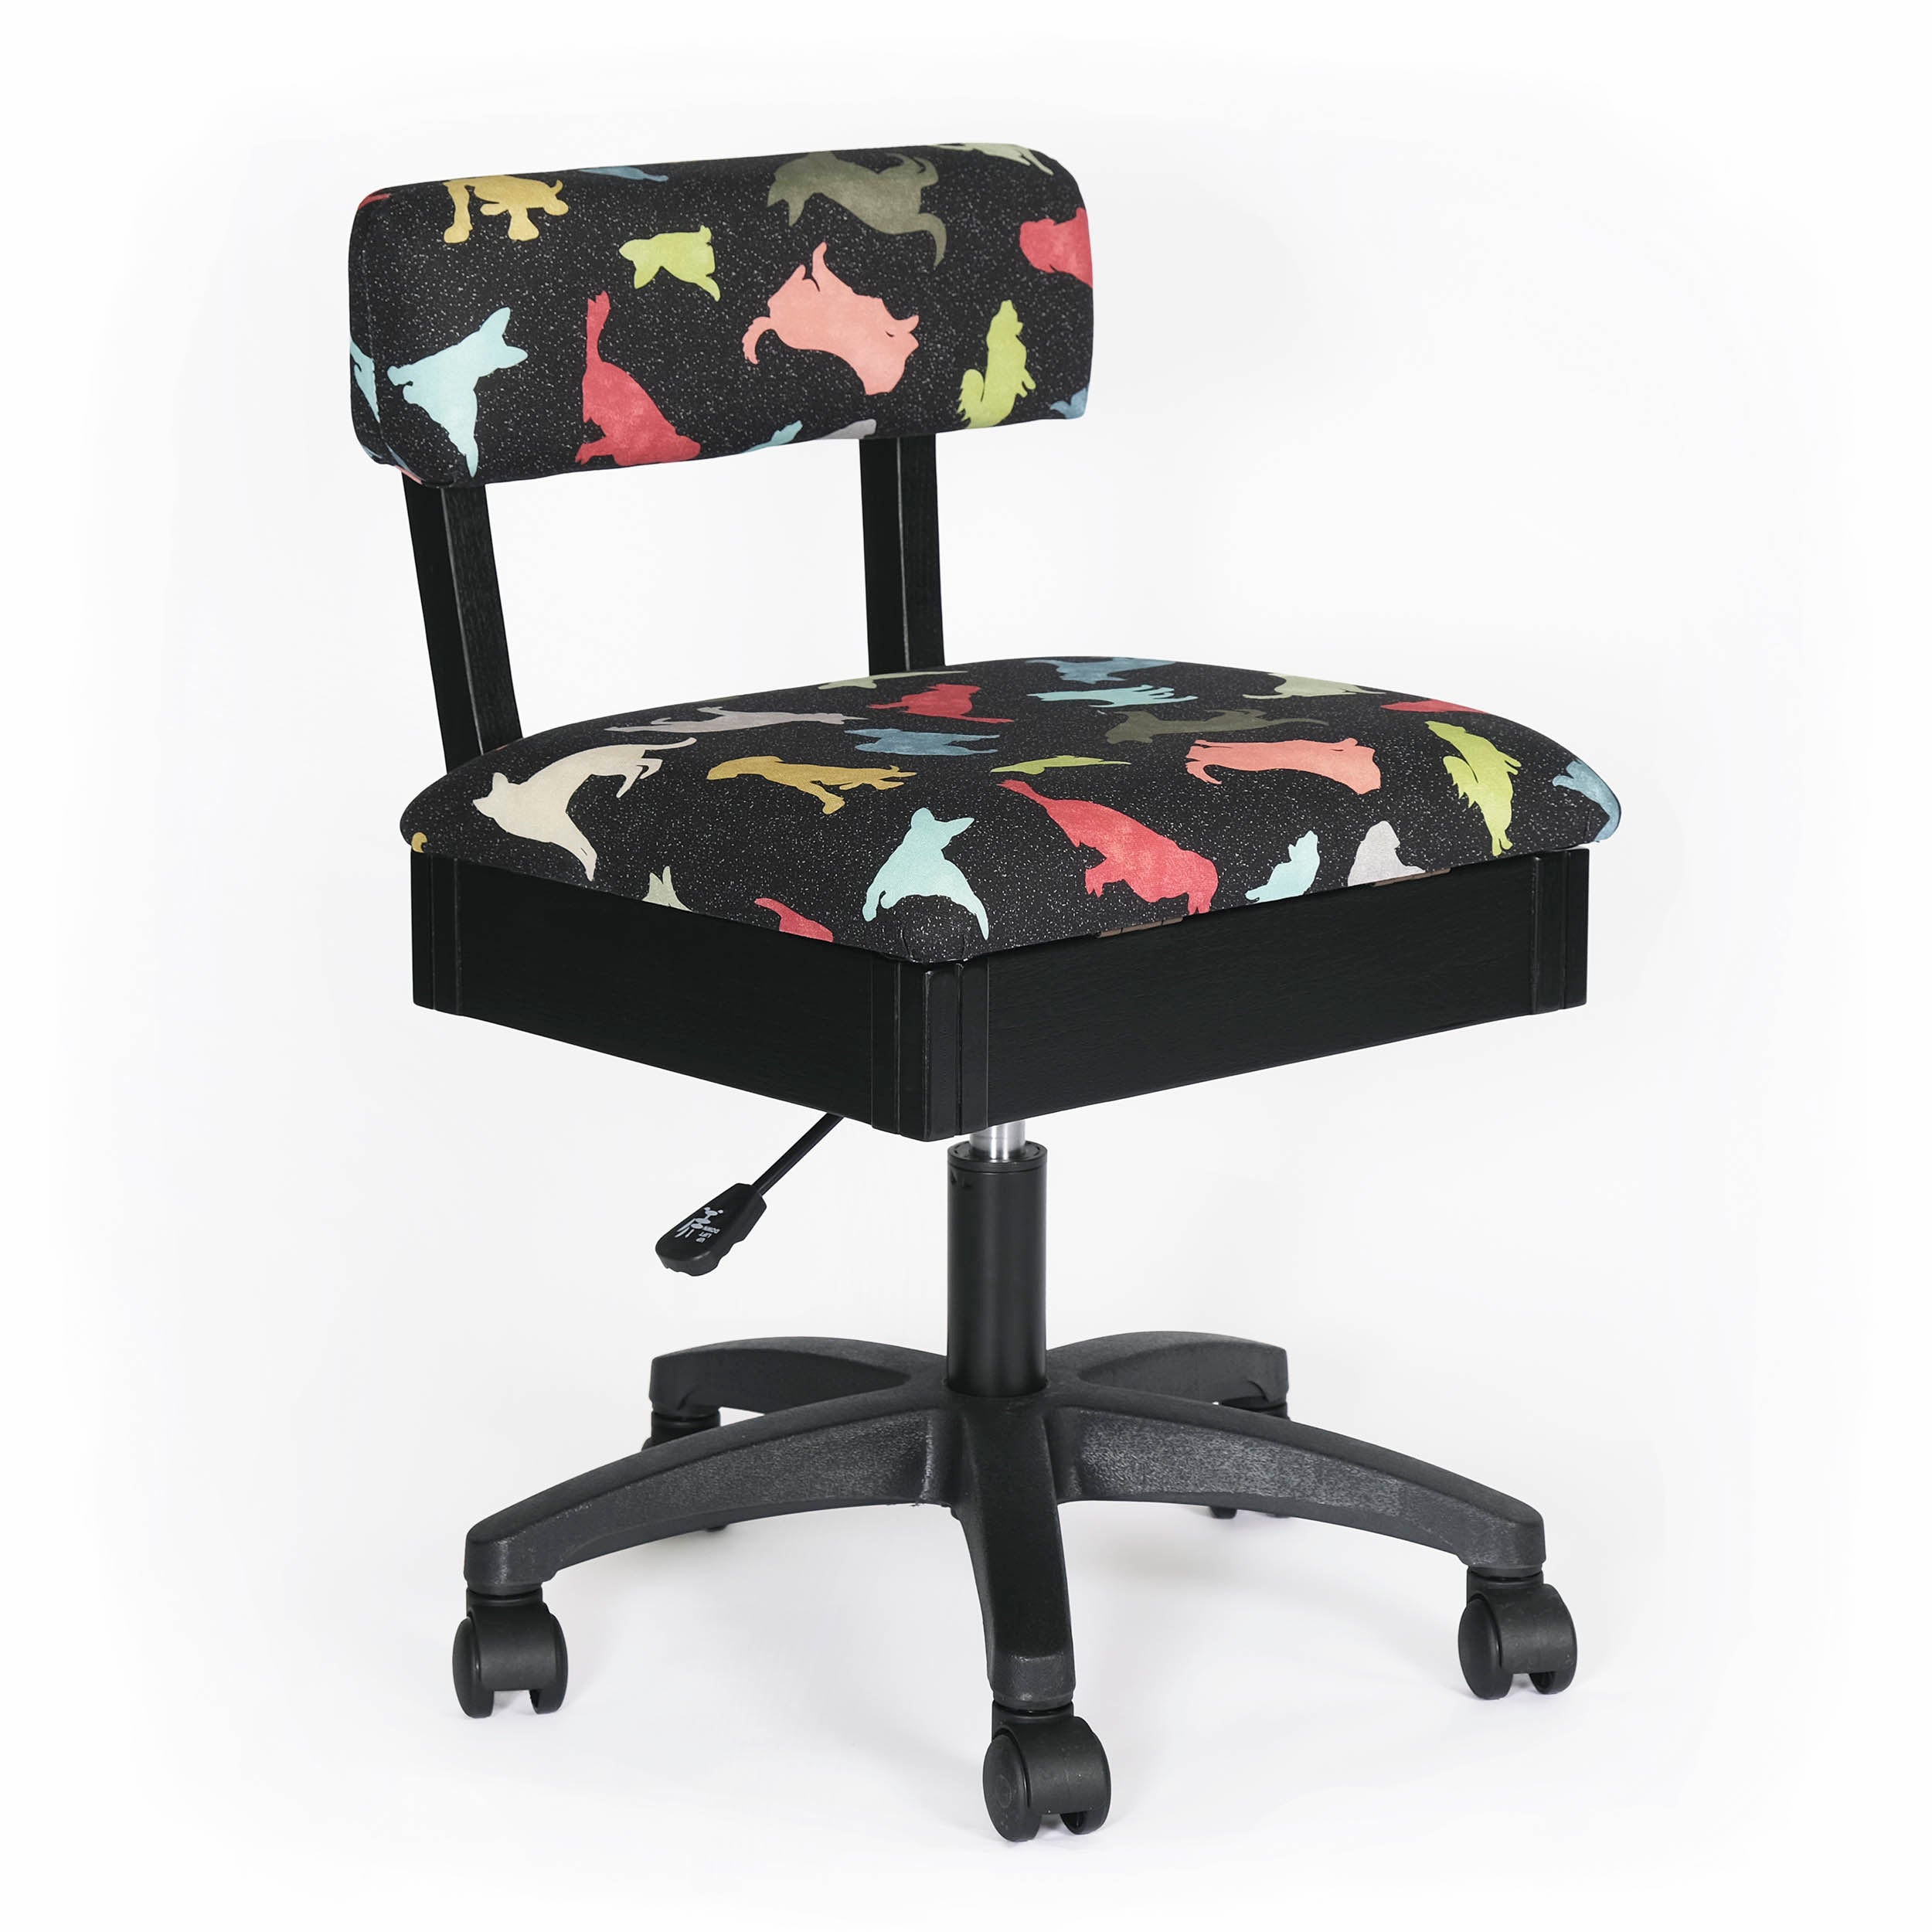 Equipment: Sewing chairs